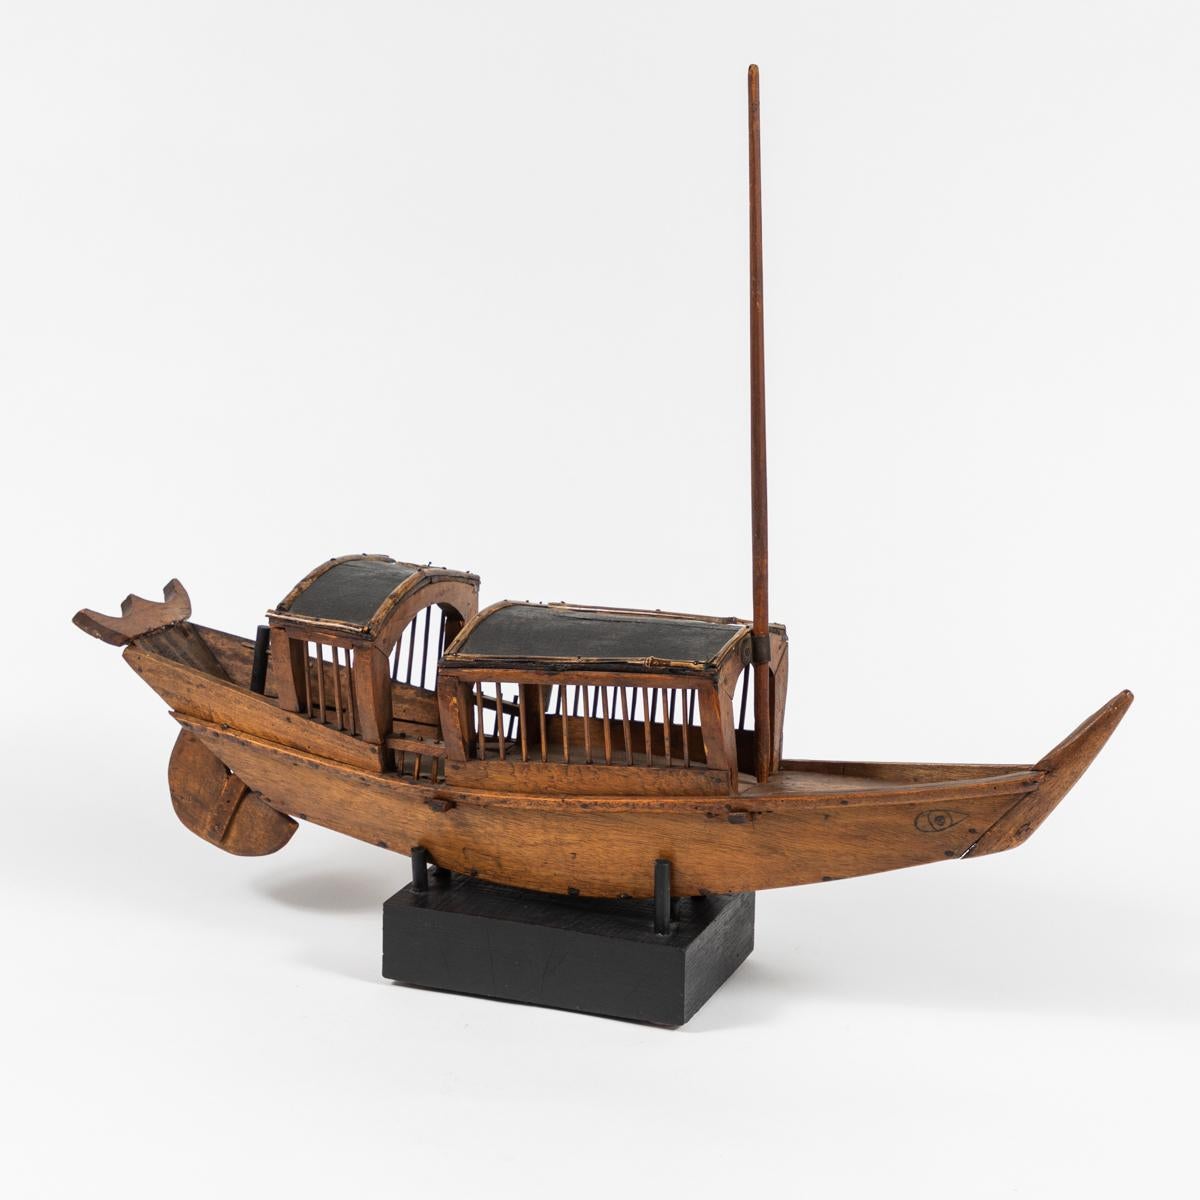 Fabulous 19th-century Belgian large wooden model of a fishing boat, with exquisite attention to detail. One-of-a-kind and marked by a humble dignity, the architectural modeling captures a spirit of simplicity and time-honored tradition.  A beautiful